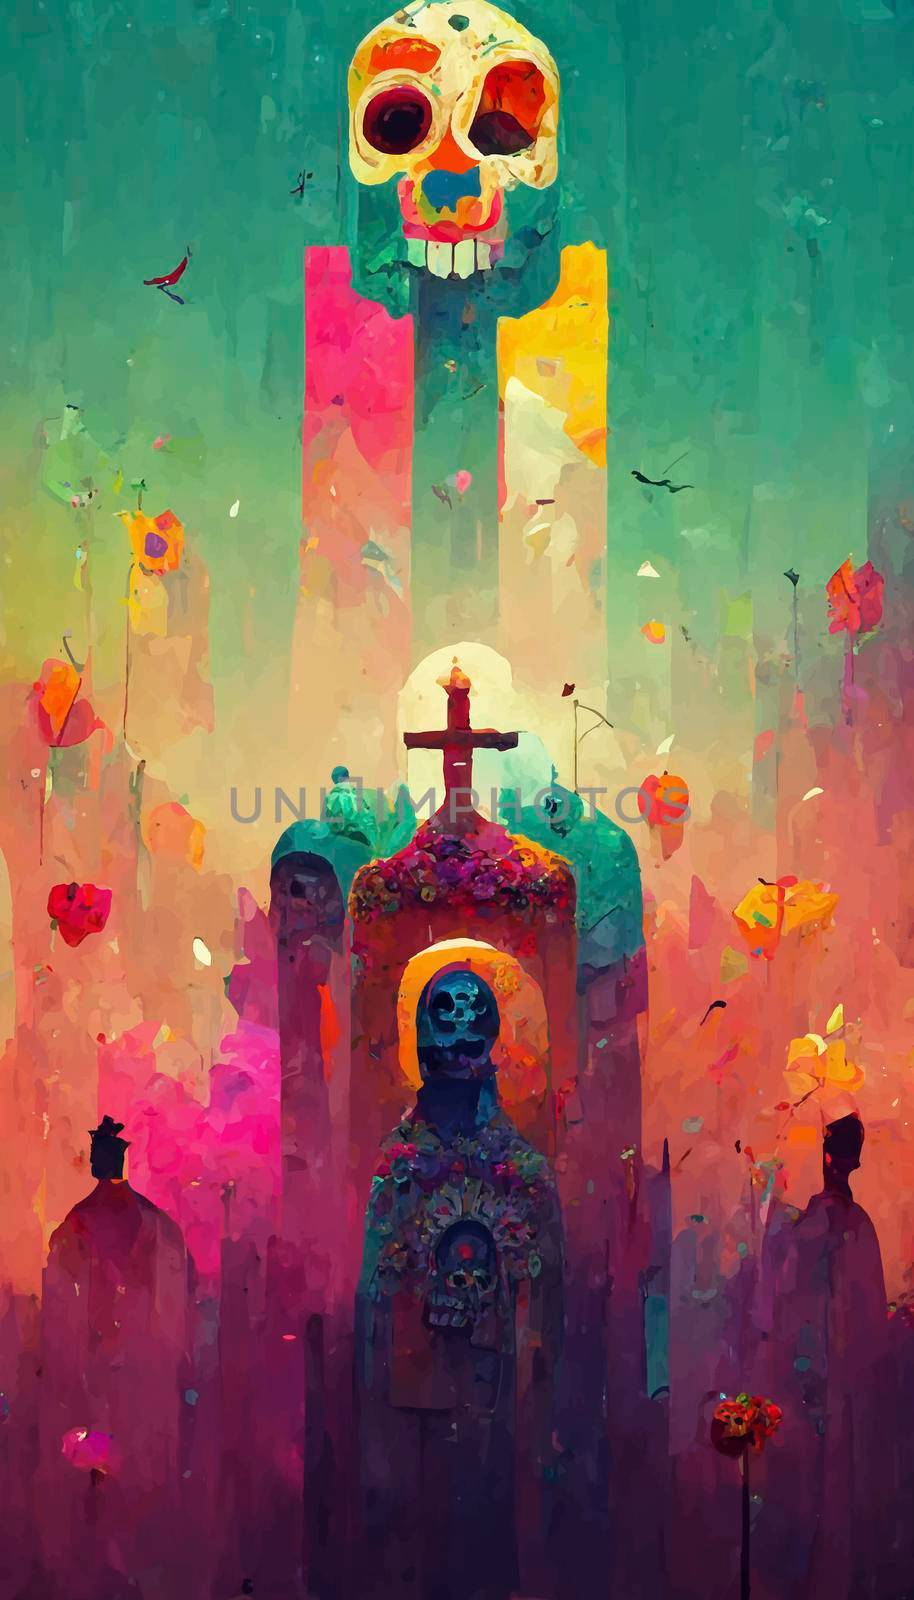 beautiful illustration of the Day of the Dead, Mexican tradition. colorful wallpaper of the day of the dead. catrin/catrina.